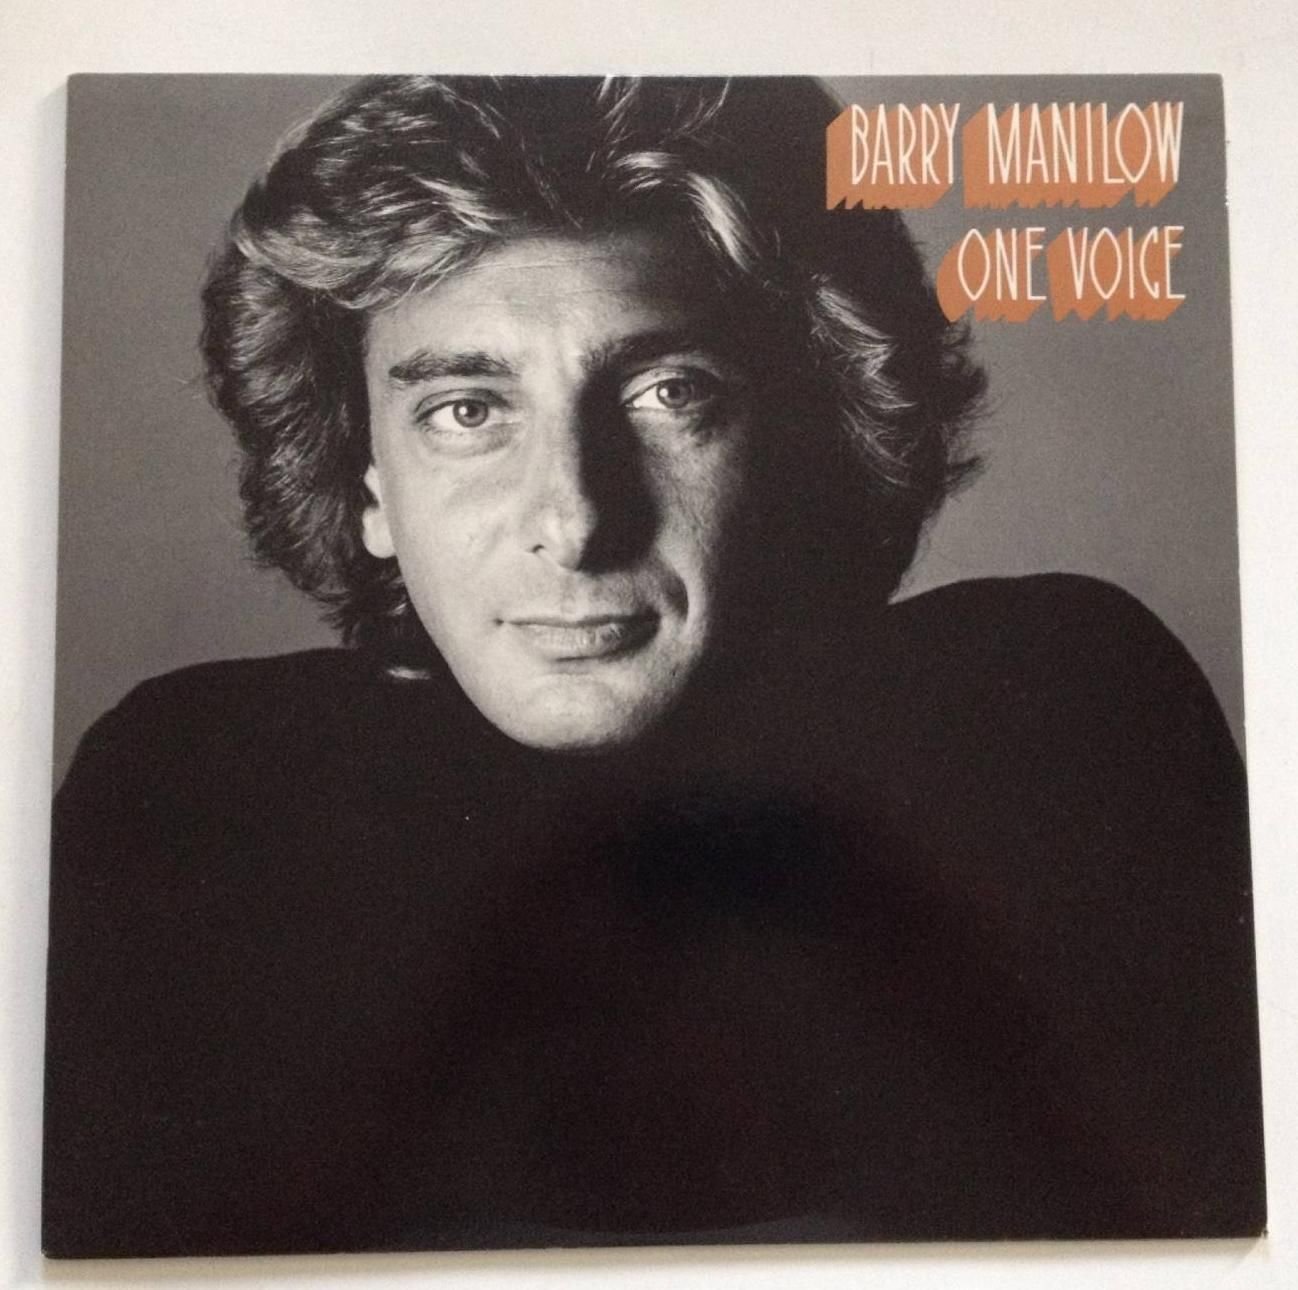 Pop) Barry Manilow One Voice Sealed 1979 LP